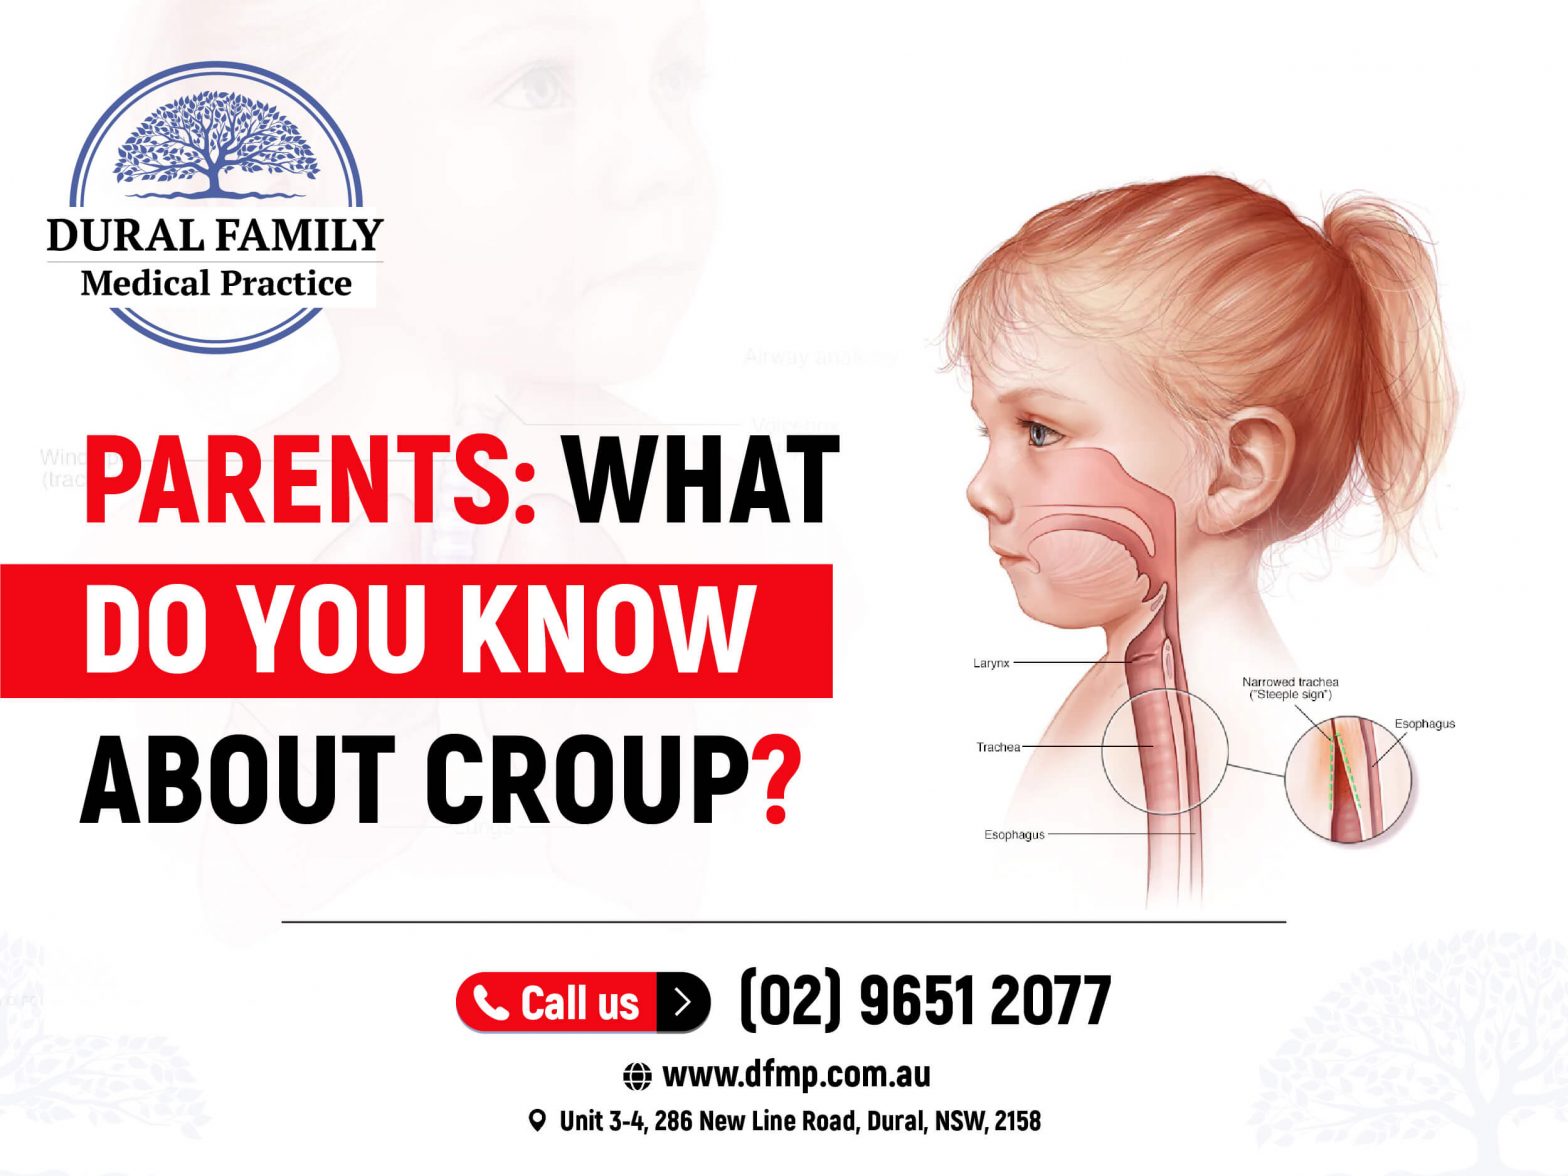 What do you know about Croup?